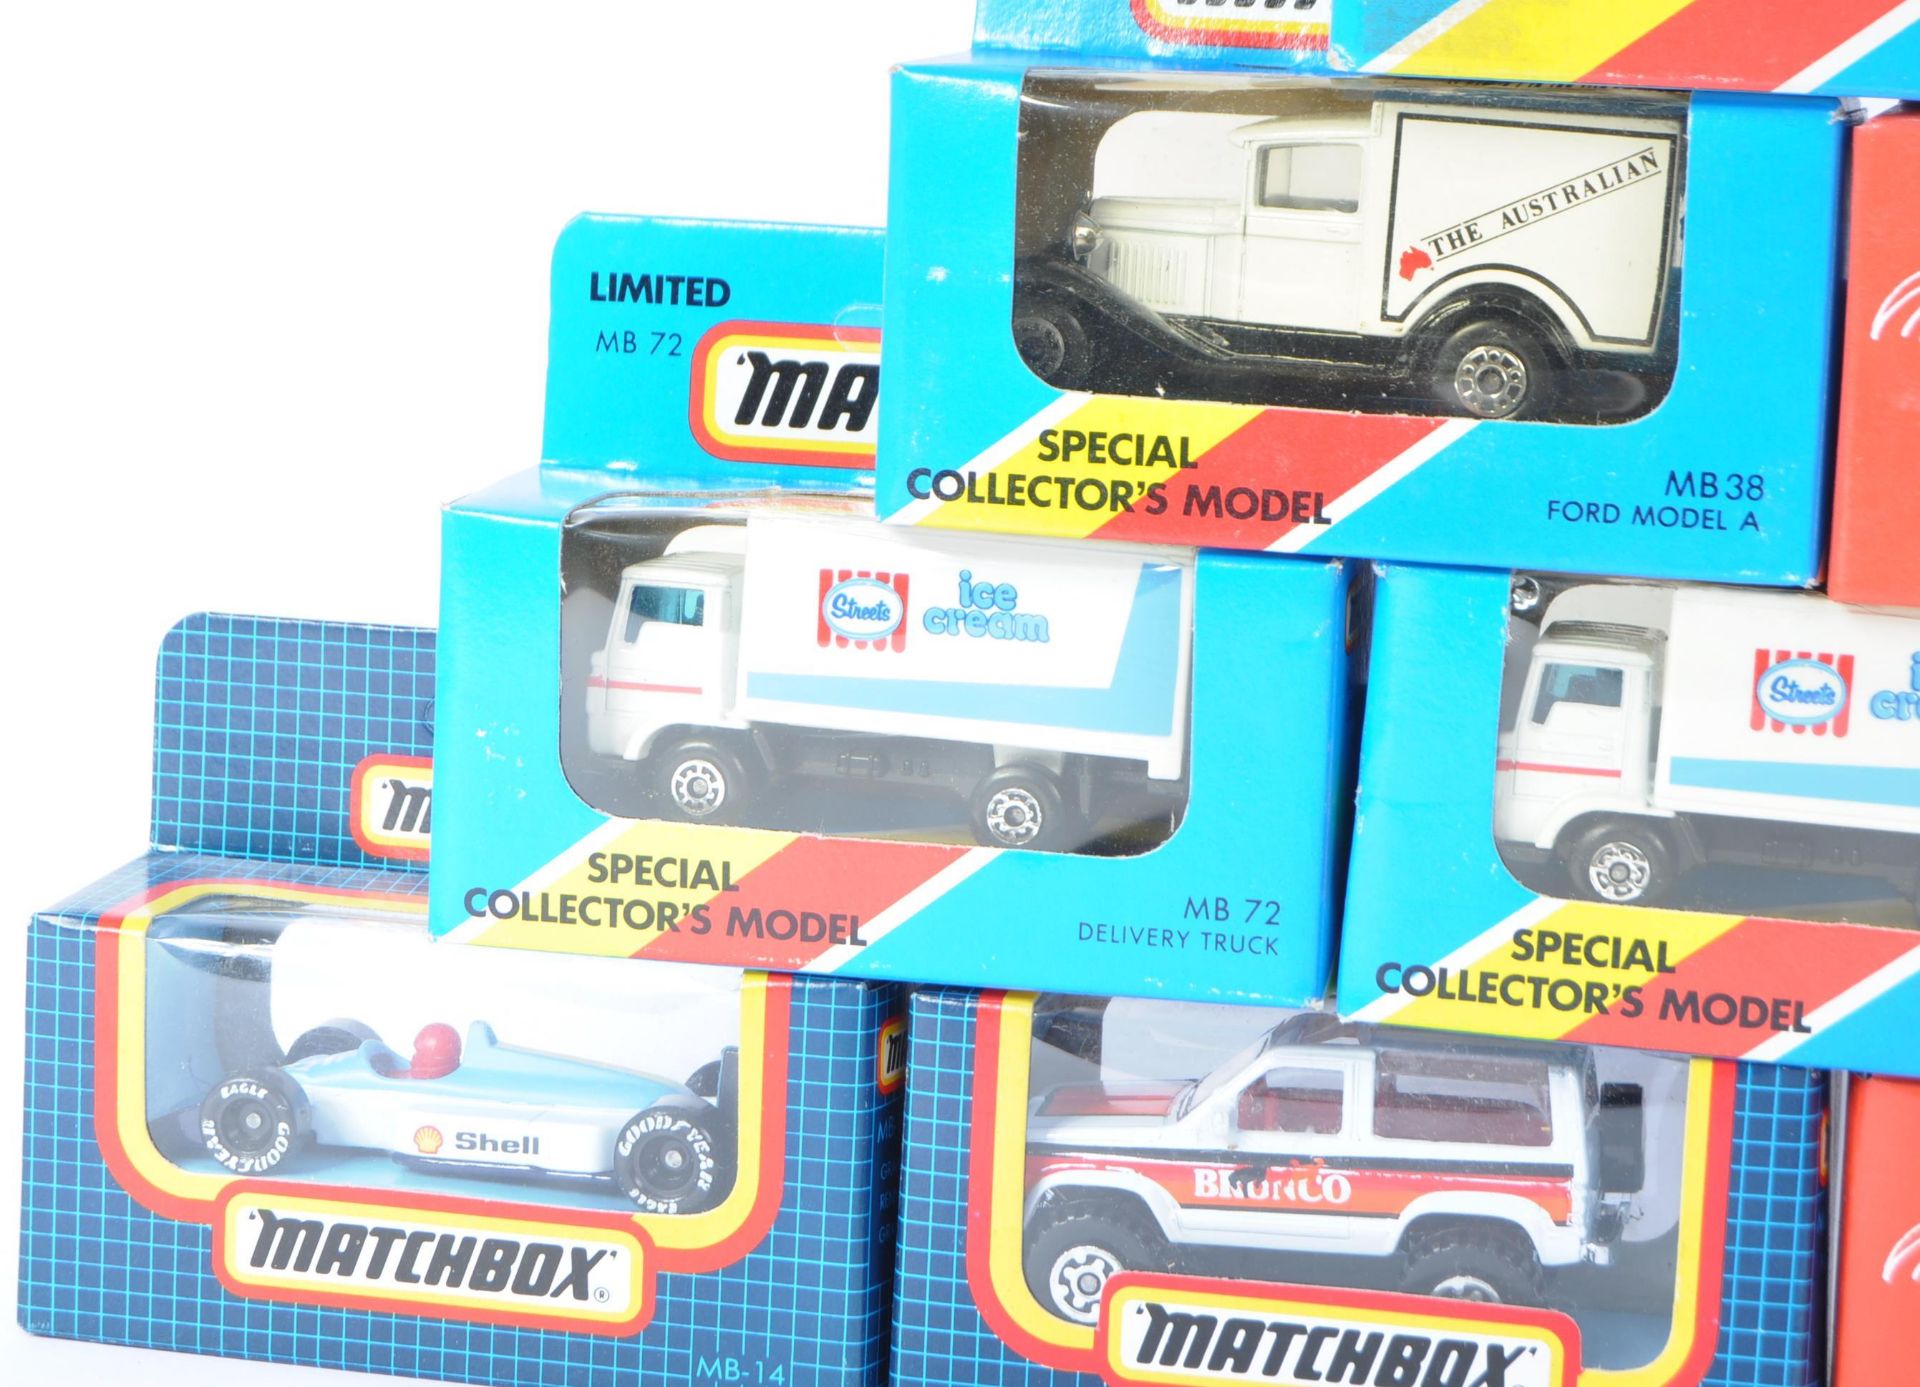 COLLECTION OF X10 VINTAGE MATCHBOX DIECAST MODEL CARS - Image 6 of 6